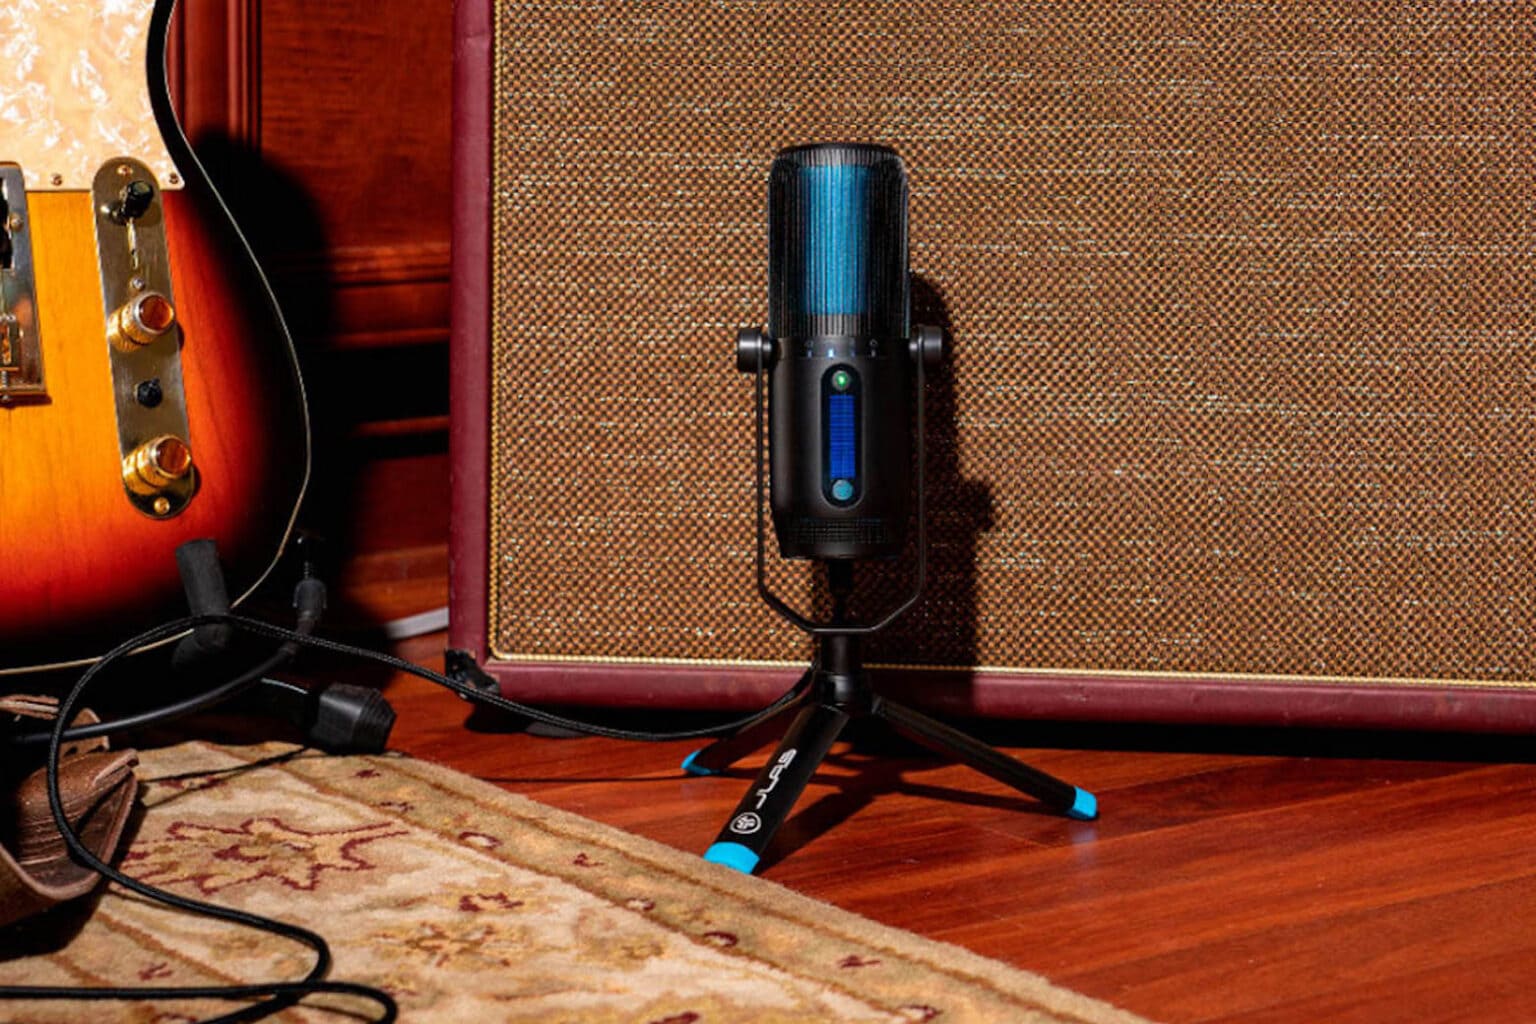 Improve your podcasts or livestreams with this $48 JLab US microphone.